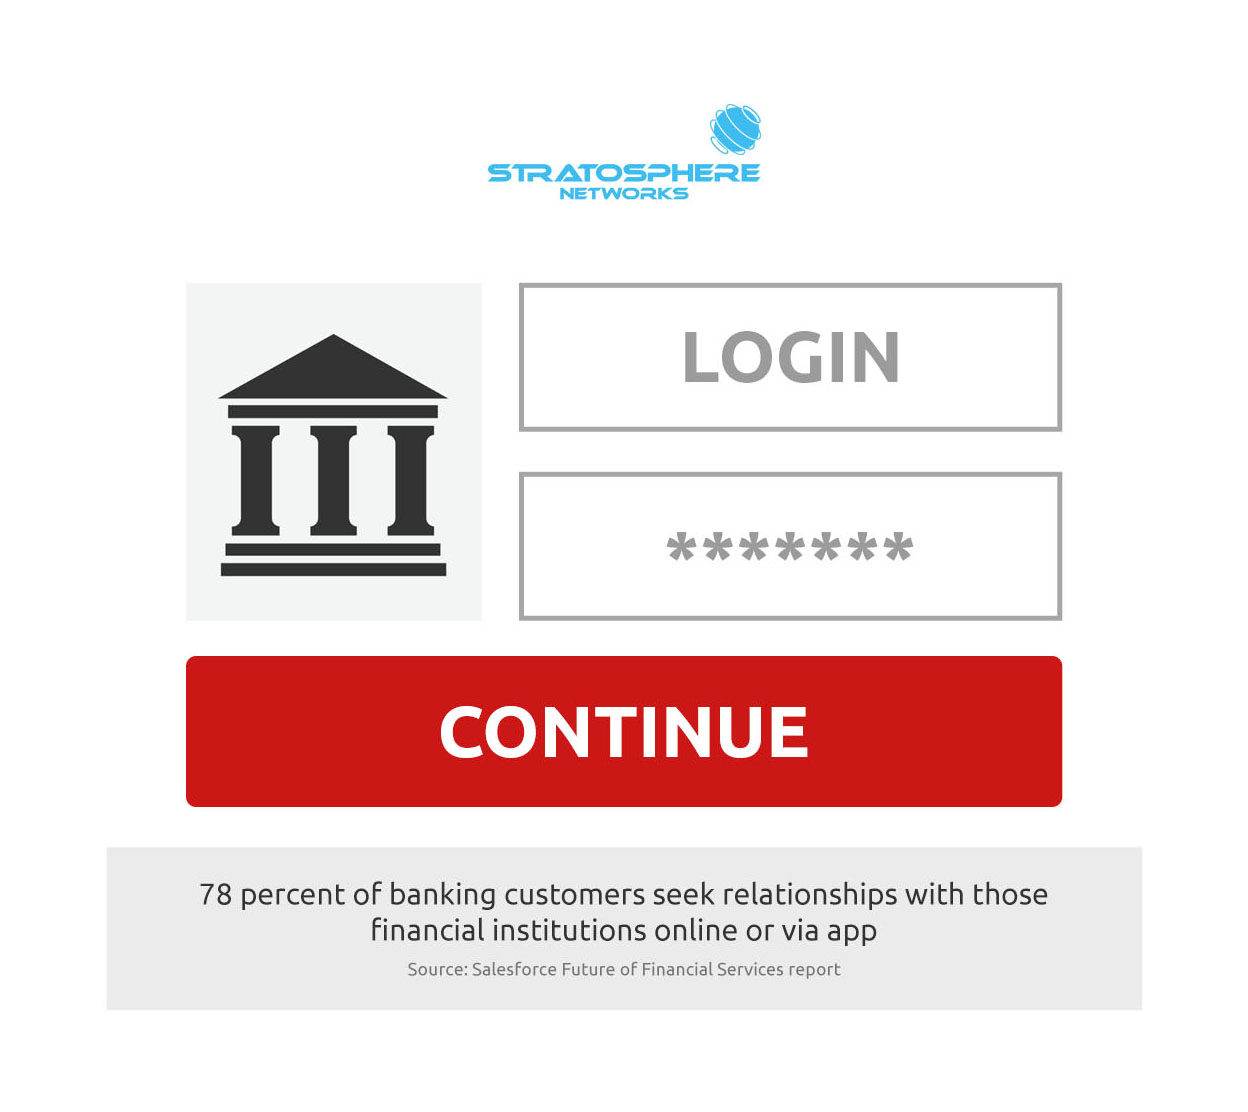 An illustration of a banking site login screen. Text below the login form states that 78 percent of banking customers seek relationships with those financial institutions online or via app (Source: Salesforce Future of Financial Services report).